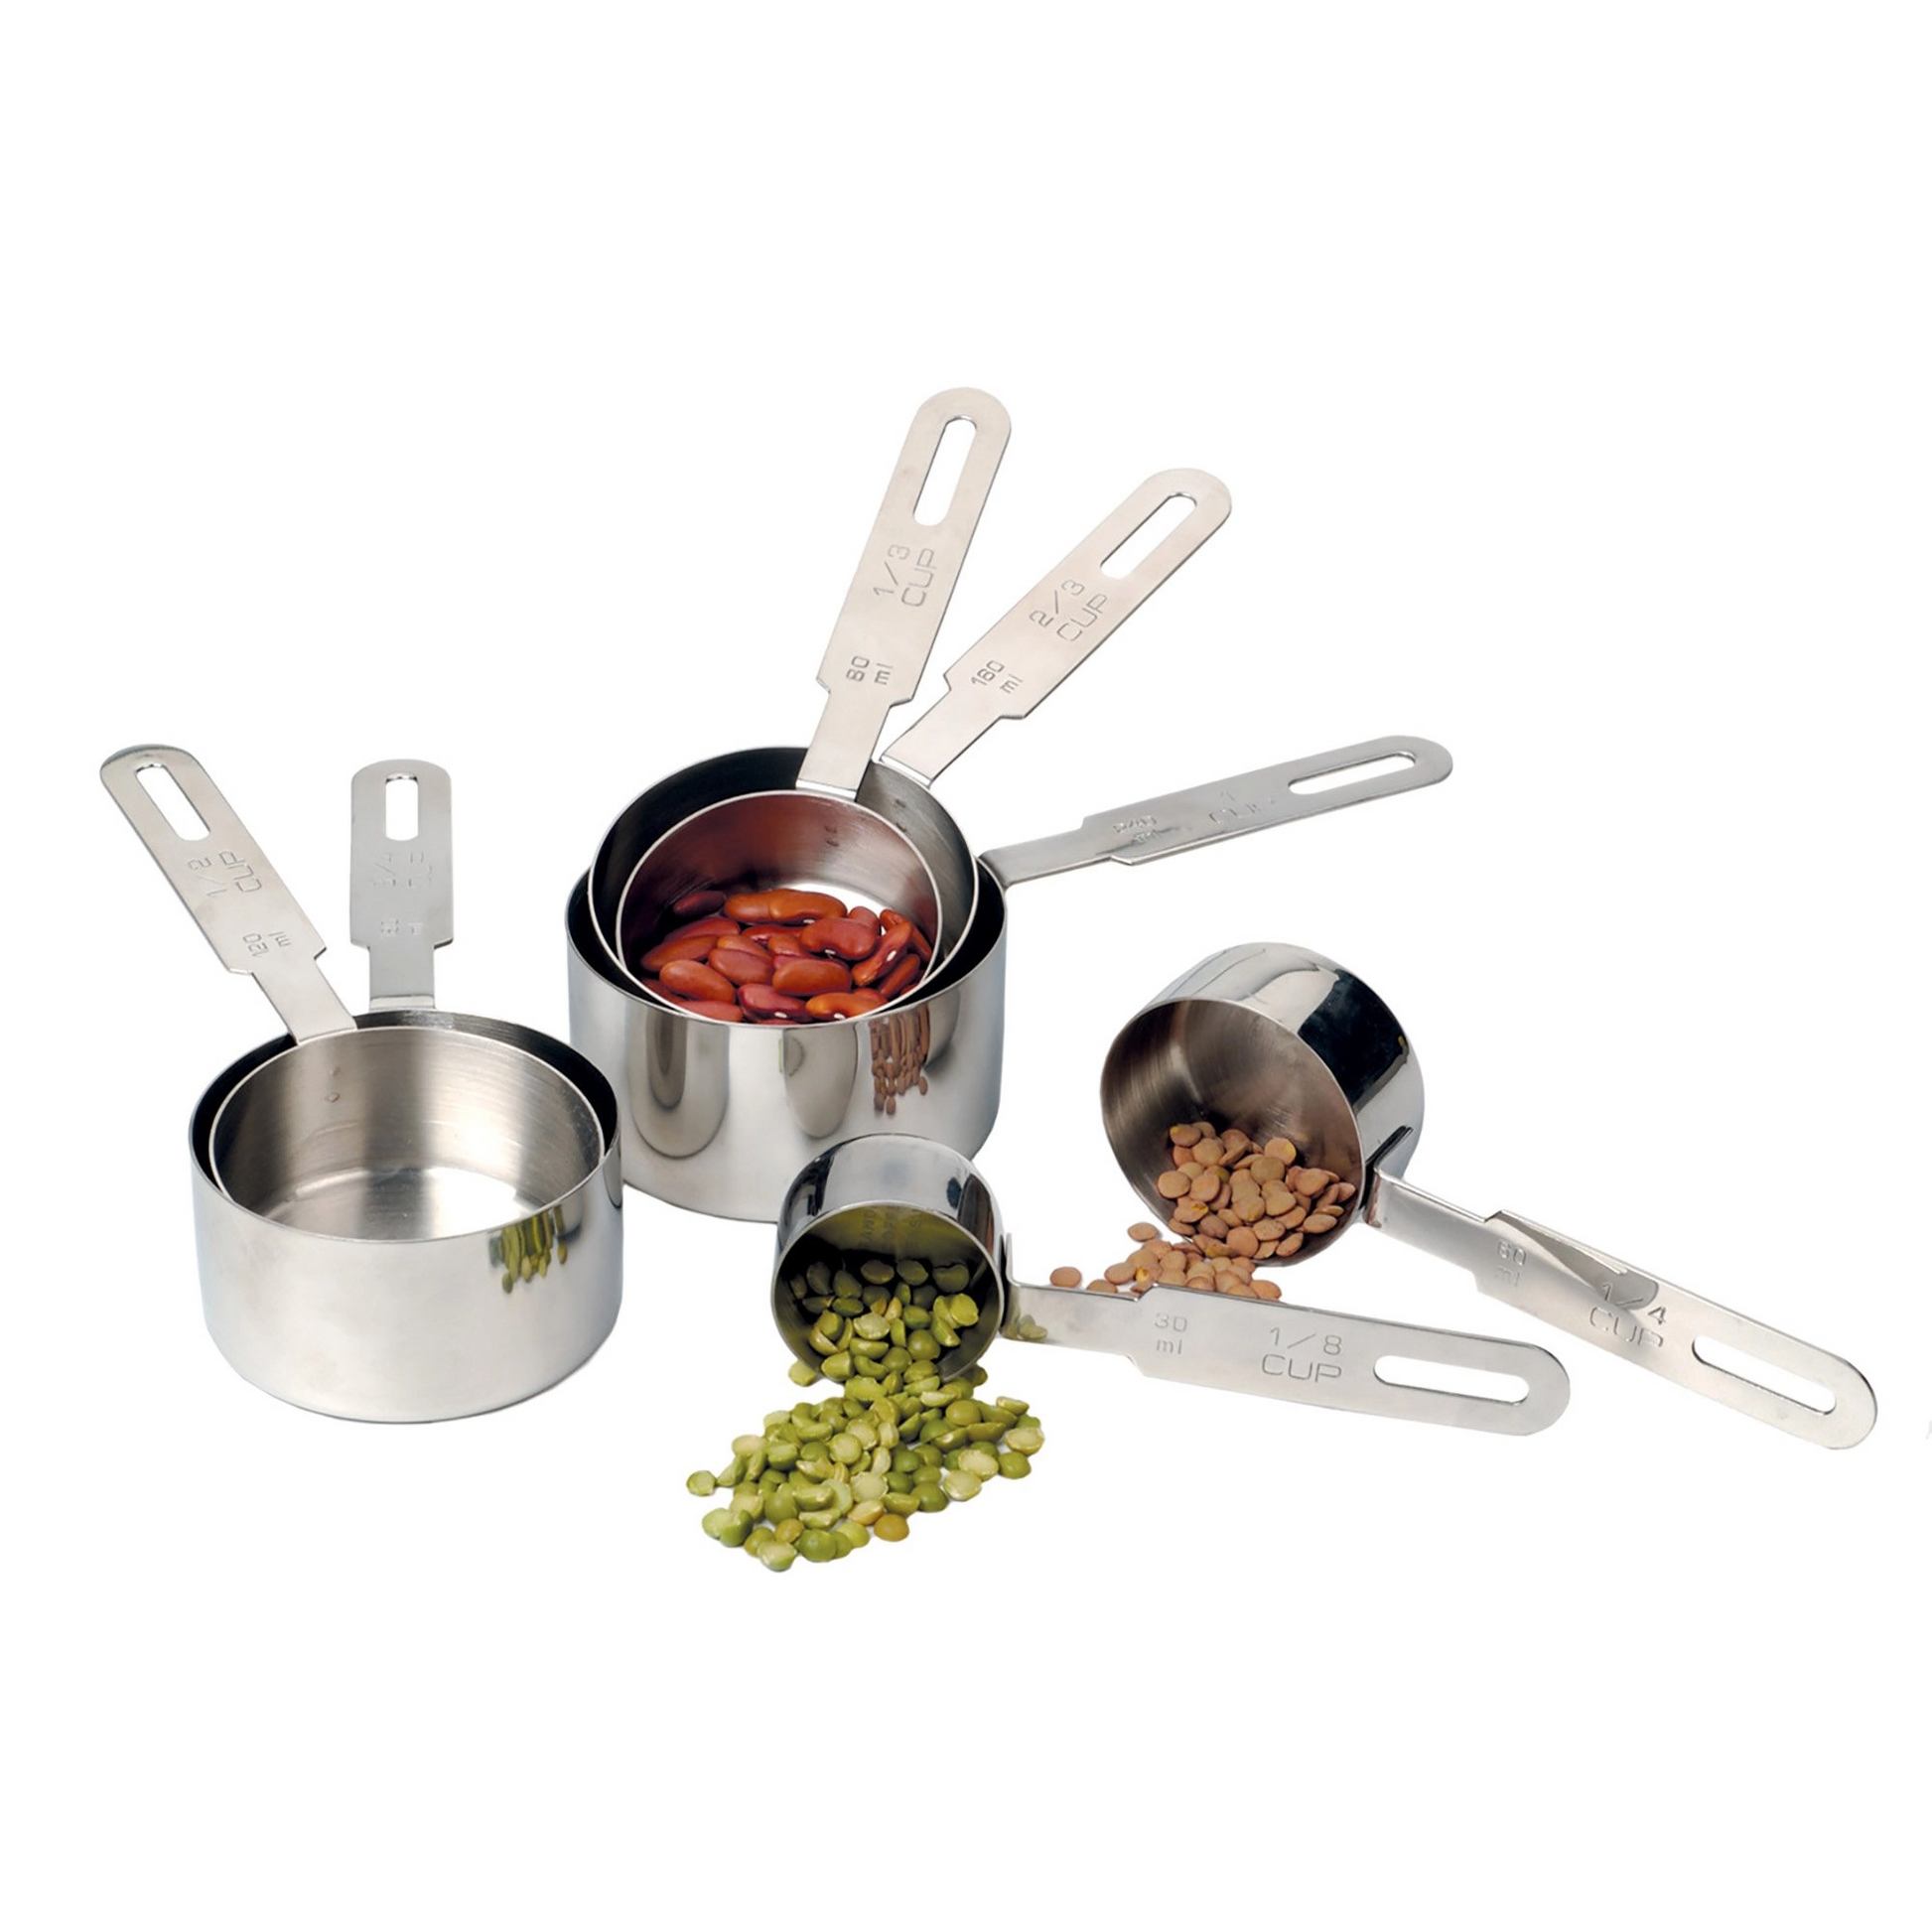 Stainless Steel Measuring Cups Set of 4 - The Peppermill